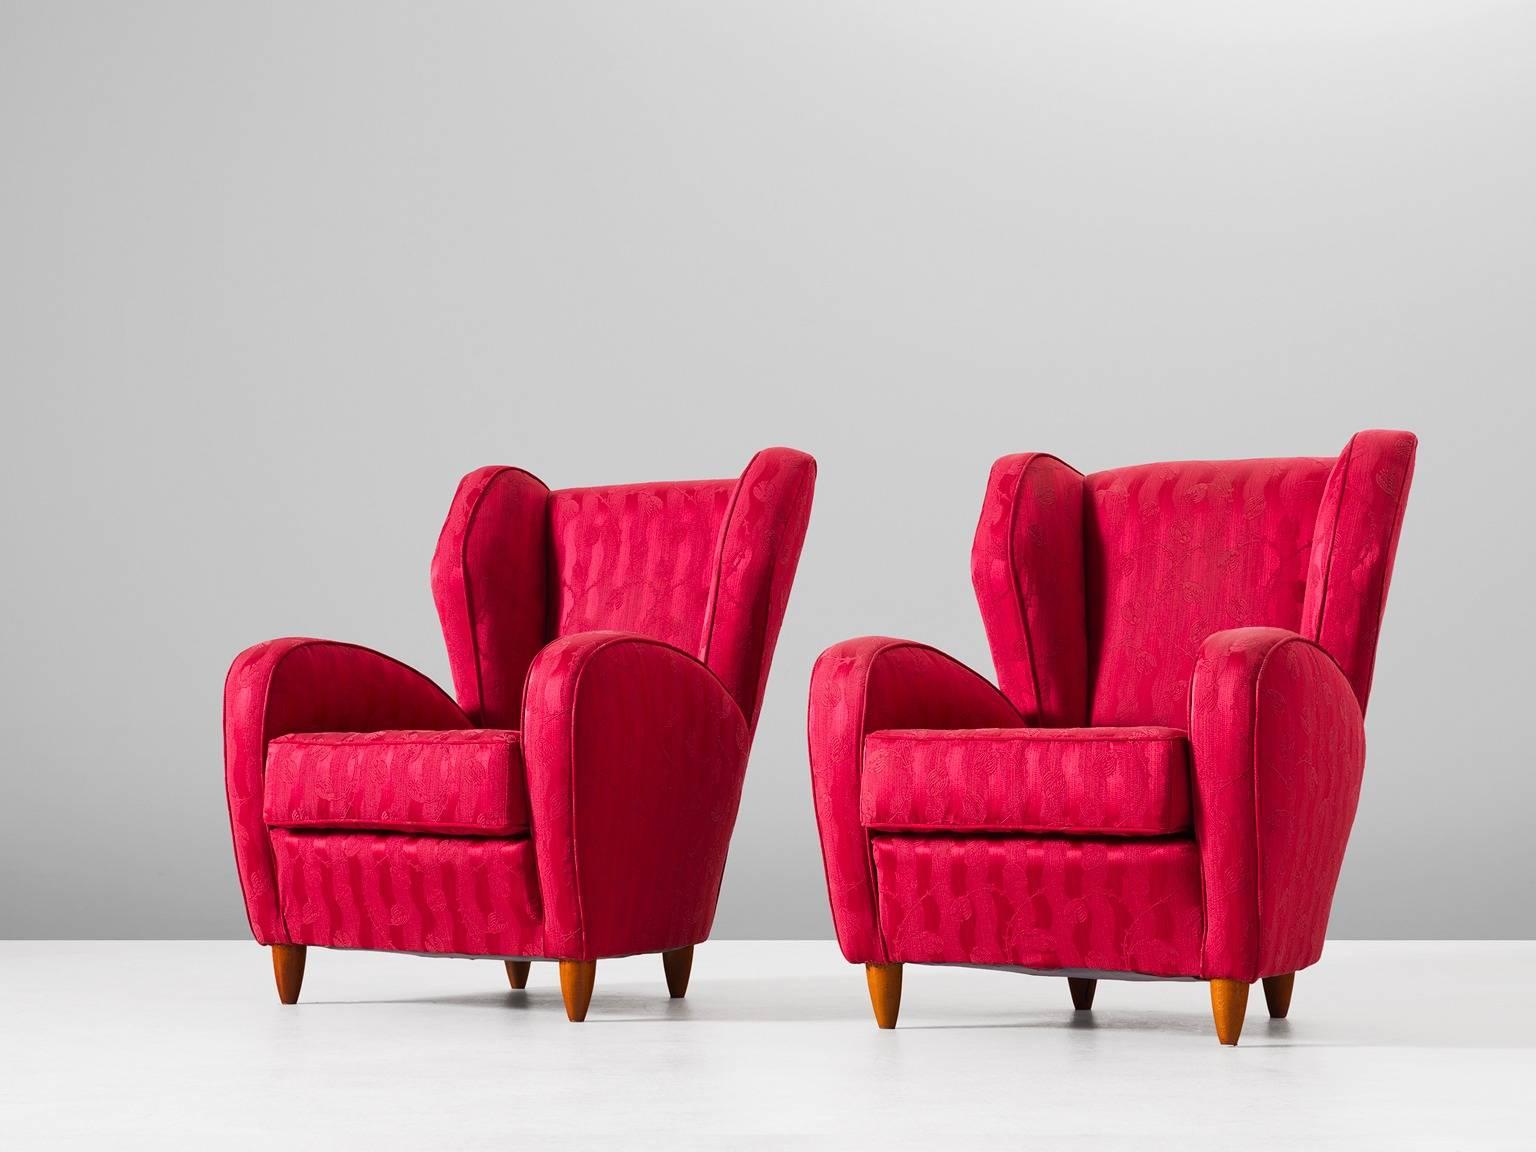 Set of two high back chairs, fabric and wood, Italy, 1950s. 

Pair of elegant Italian wingback chairs. The high armrests and back give this design a Classic and solid character. Beautifully curved with rounded edges. The back forms a beautiful